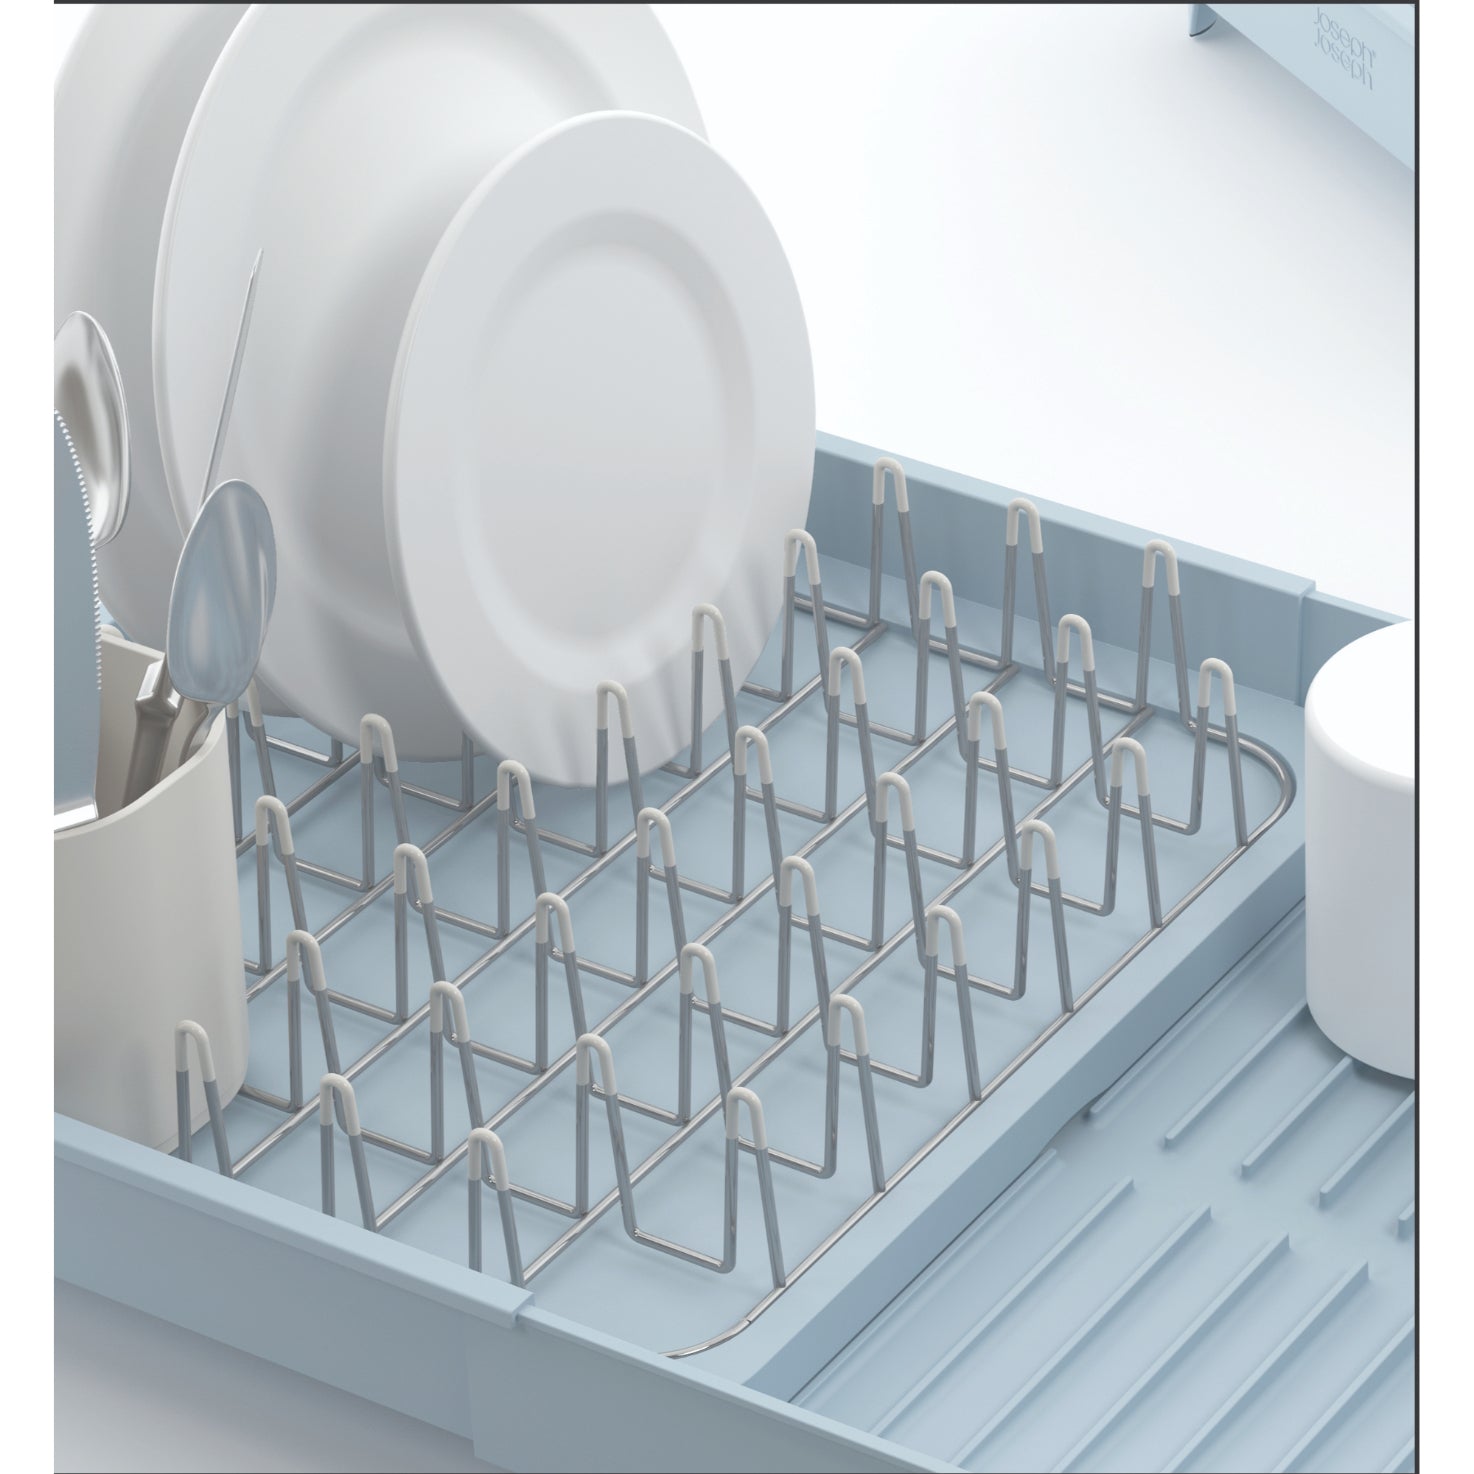 Extend Expandable Disk Rack with Draining Plug - Grey/Blue